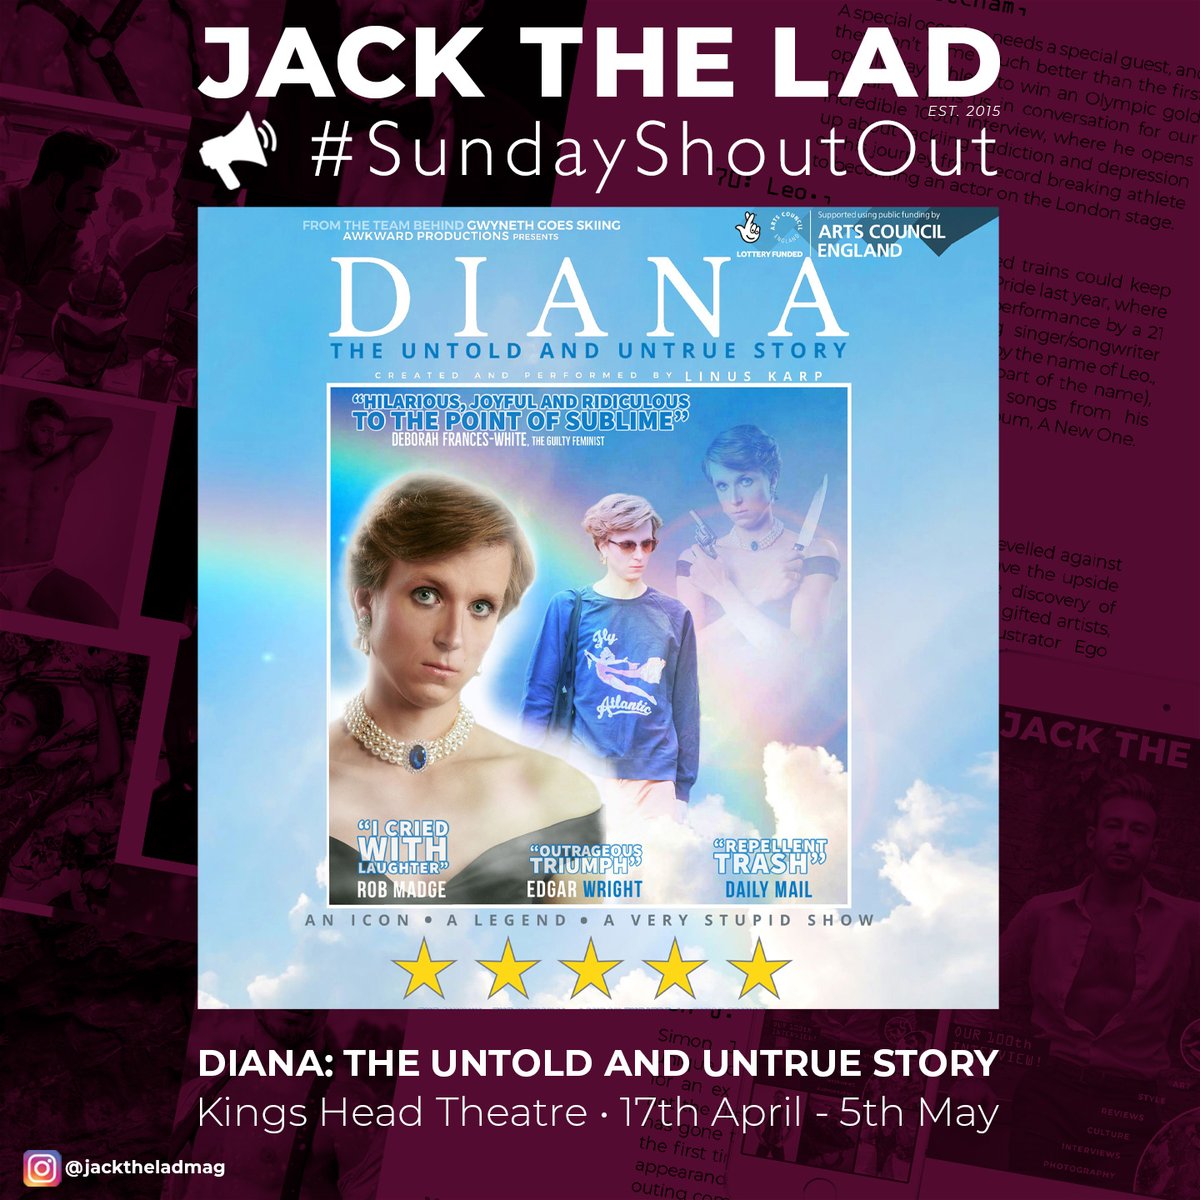 #SundayShoutout Here's the real scoop...having garnered a full five stars from Jack The Lad during its original run, we are delighted to see the return of Diana: The Untold And Untrue Story from Awkward Productions. We'll definitely be going to The Kings Head for second helpings!